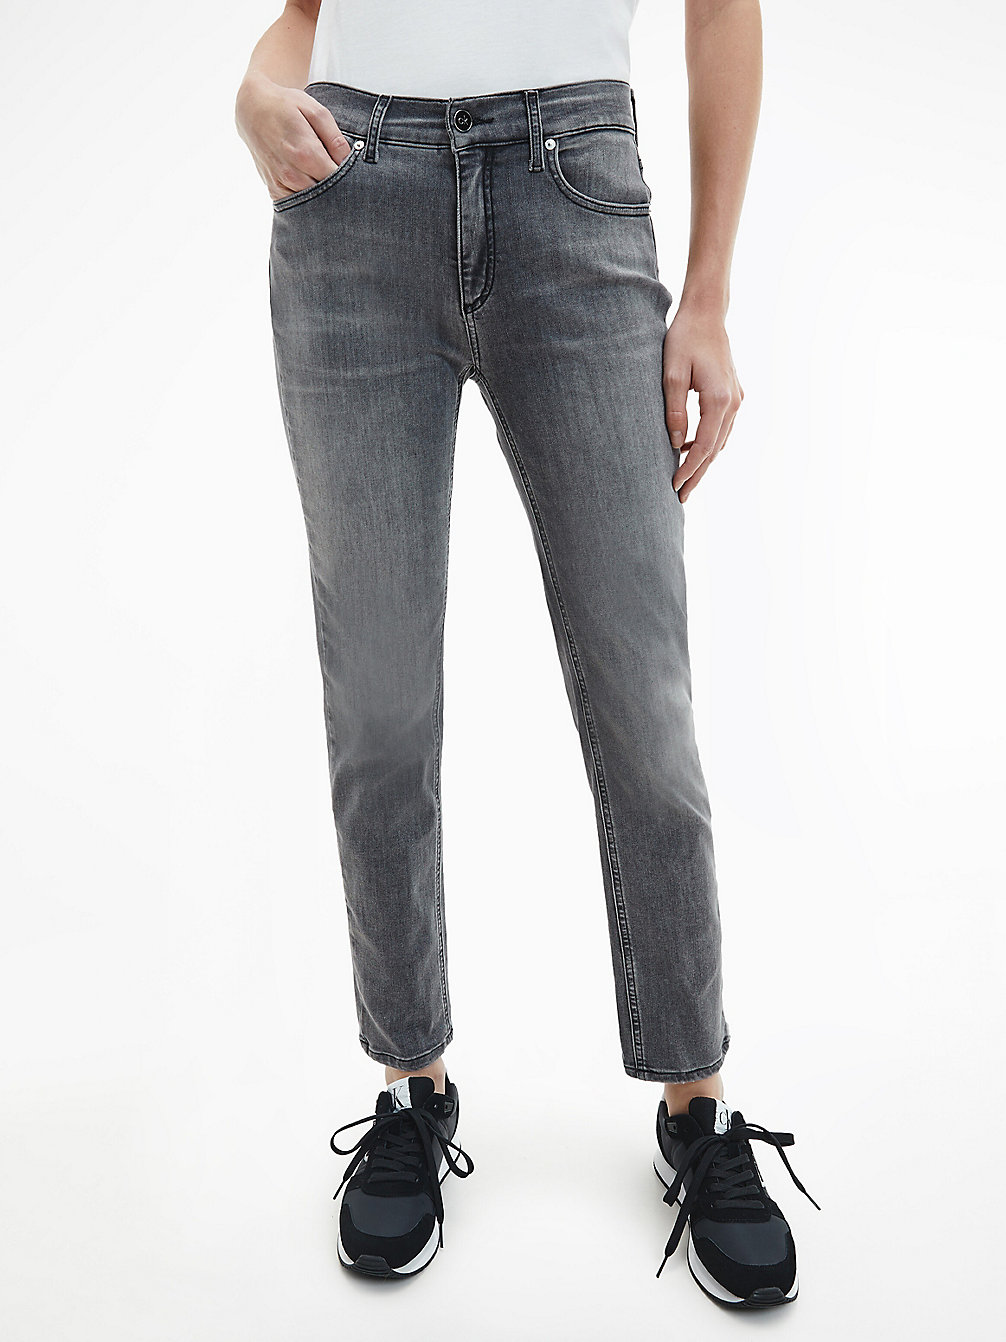 Mid Rise Slim Jeans > GREY > undefined mujer > Calvin Klein